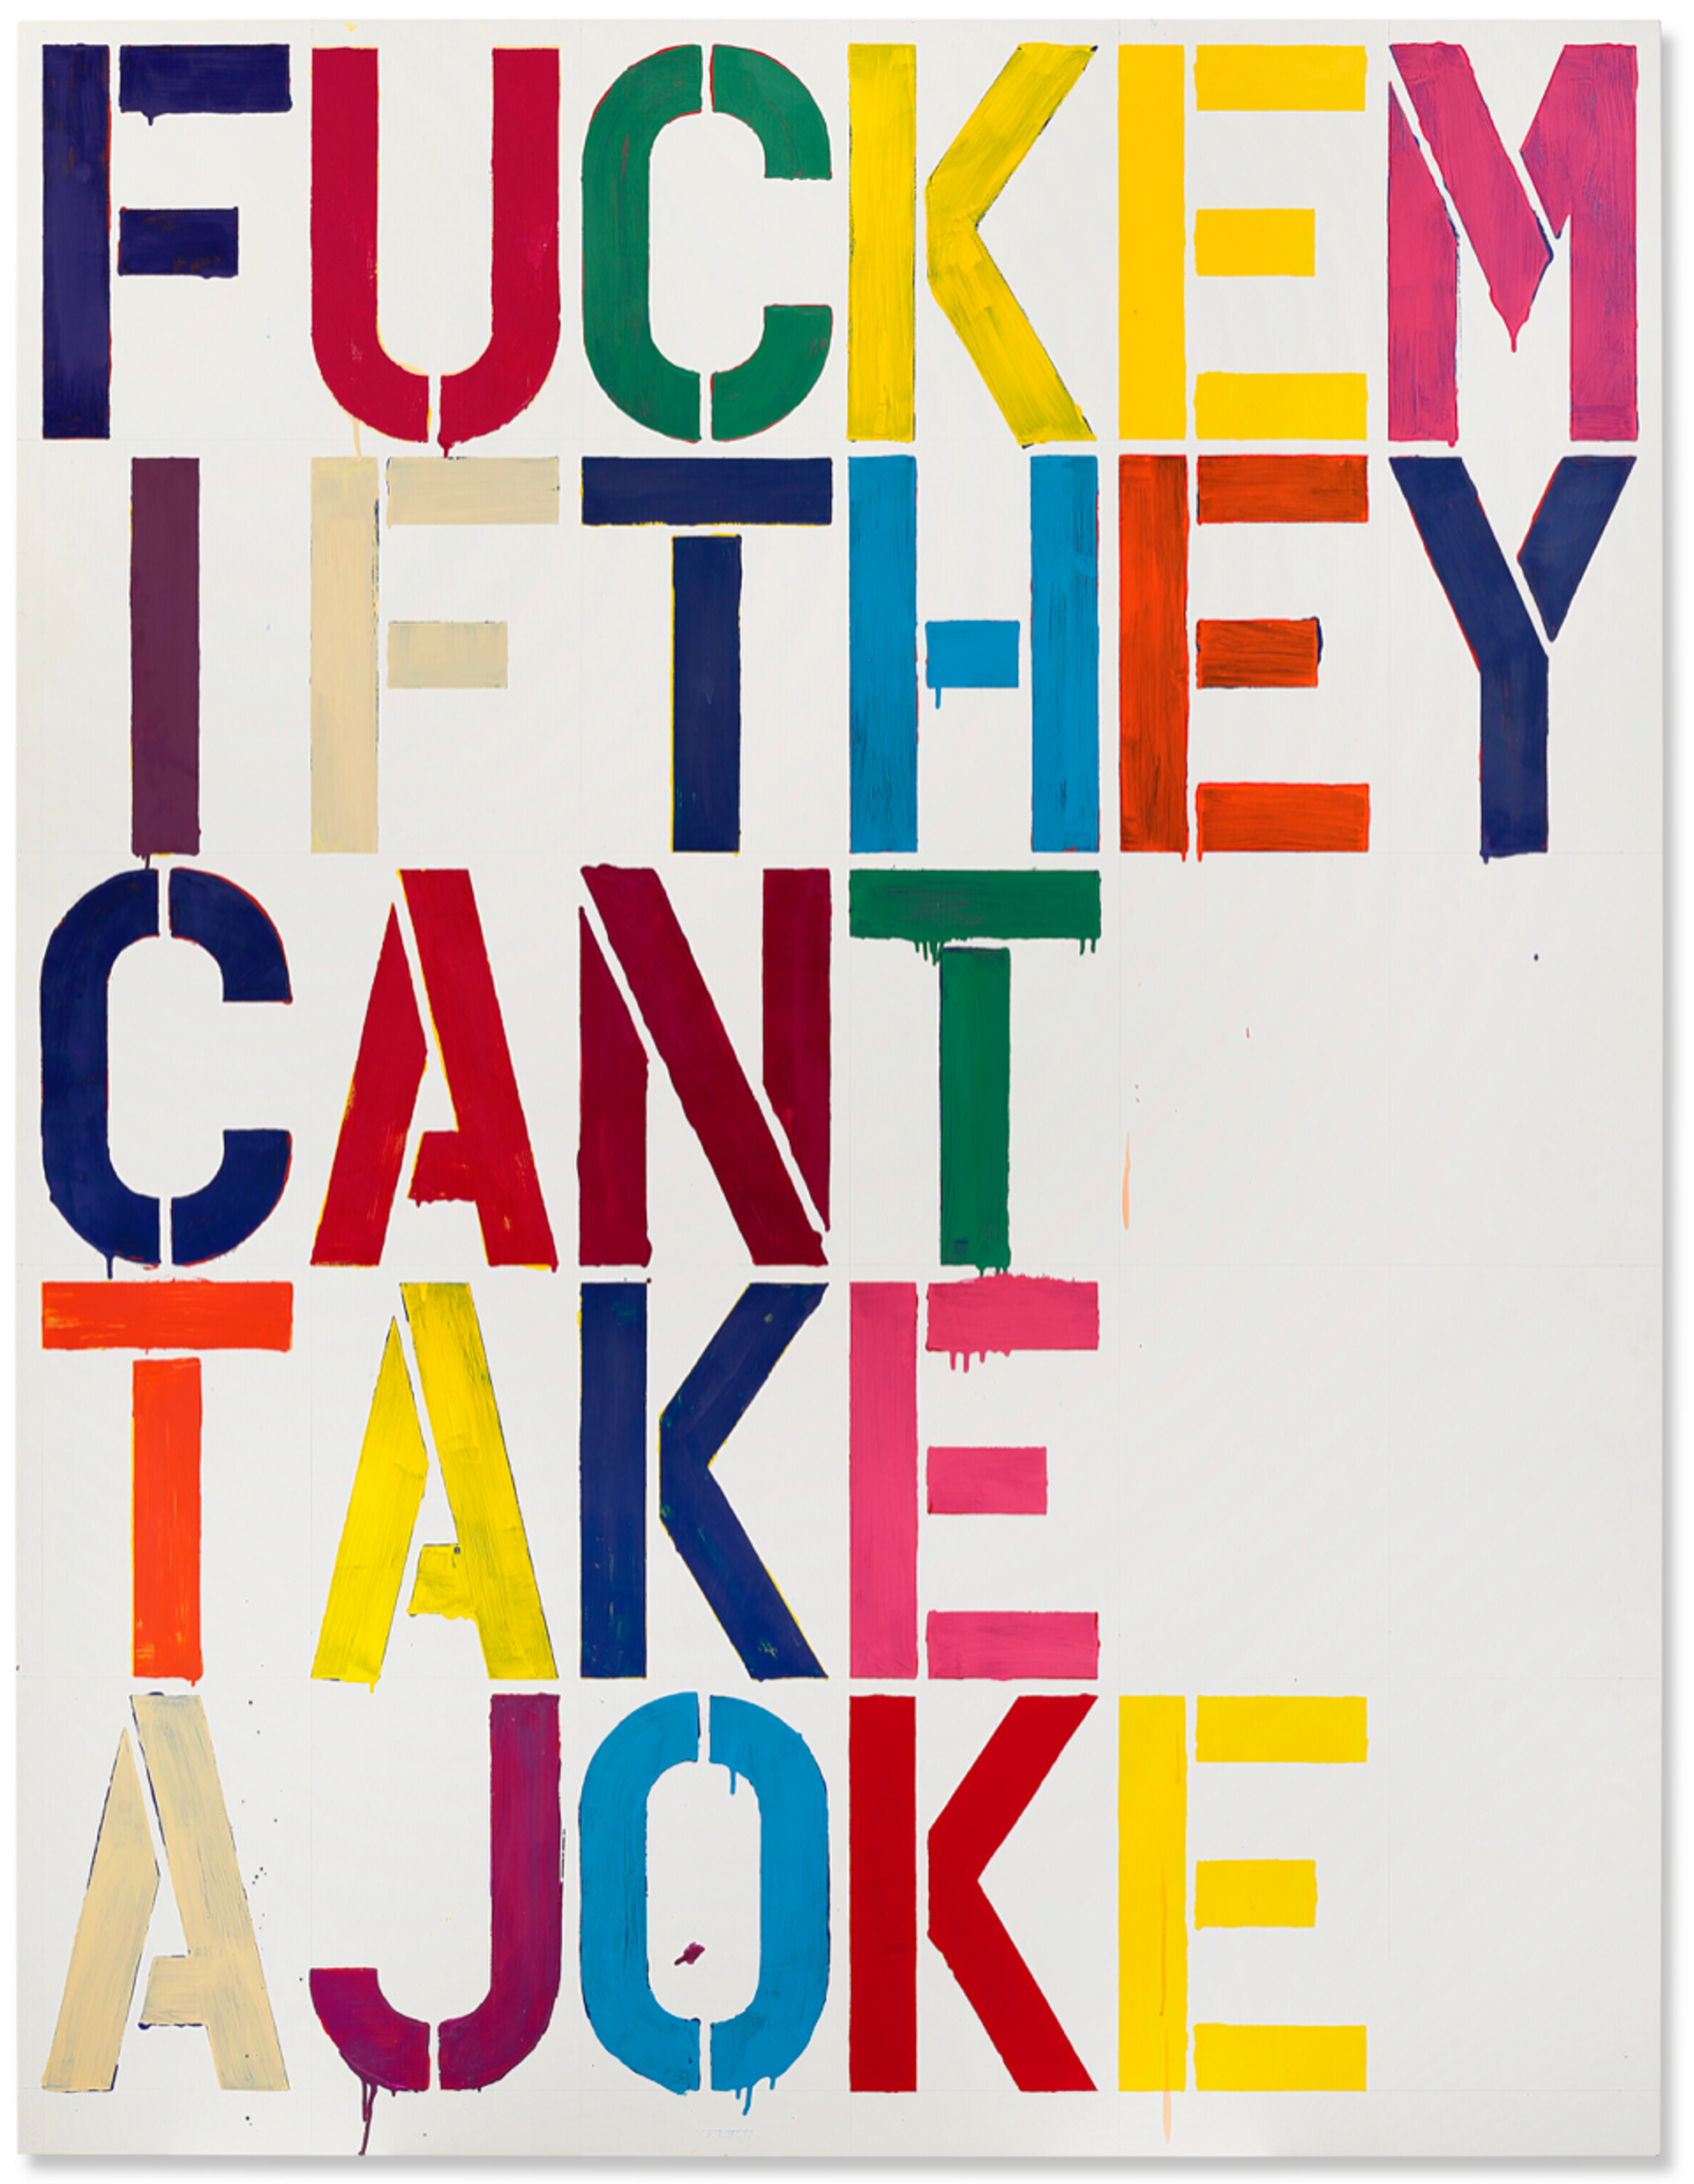 Image © Christie's / Untitled © Christopher Wool 1993